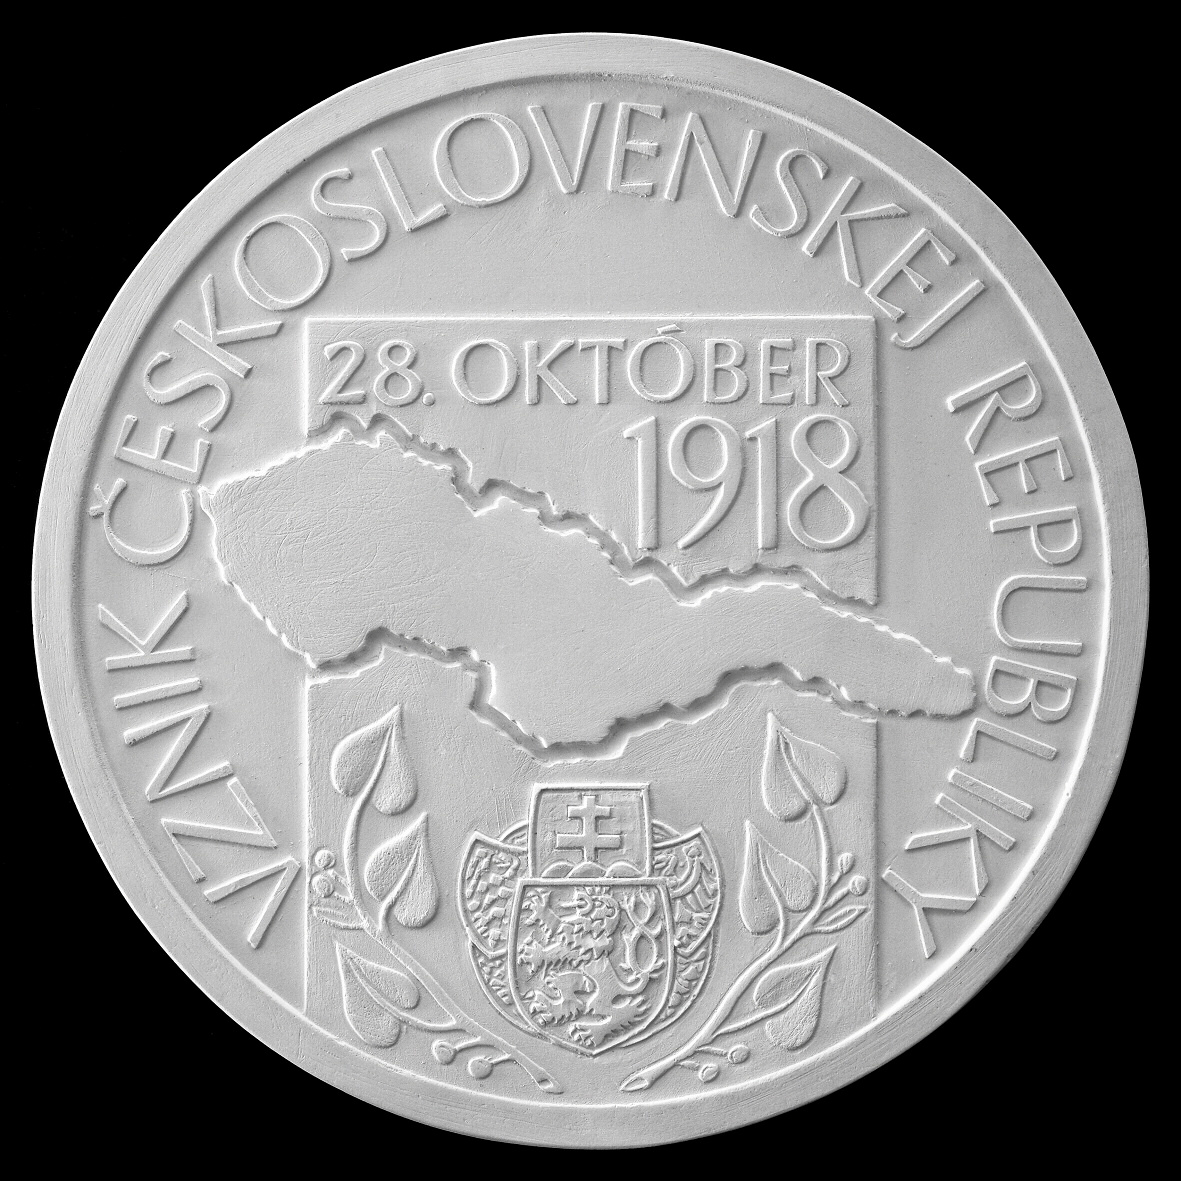 Second prize and the design selected for the coin